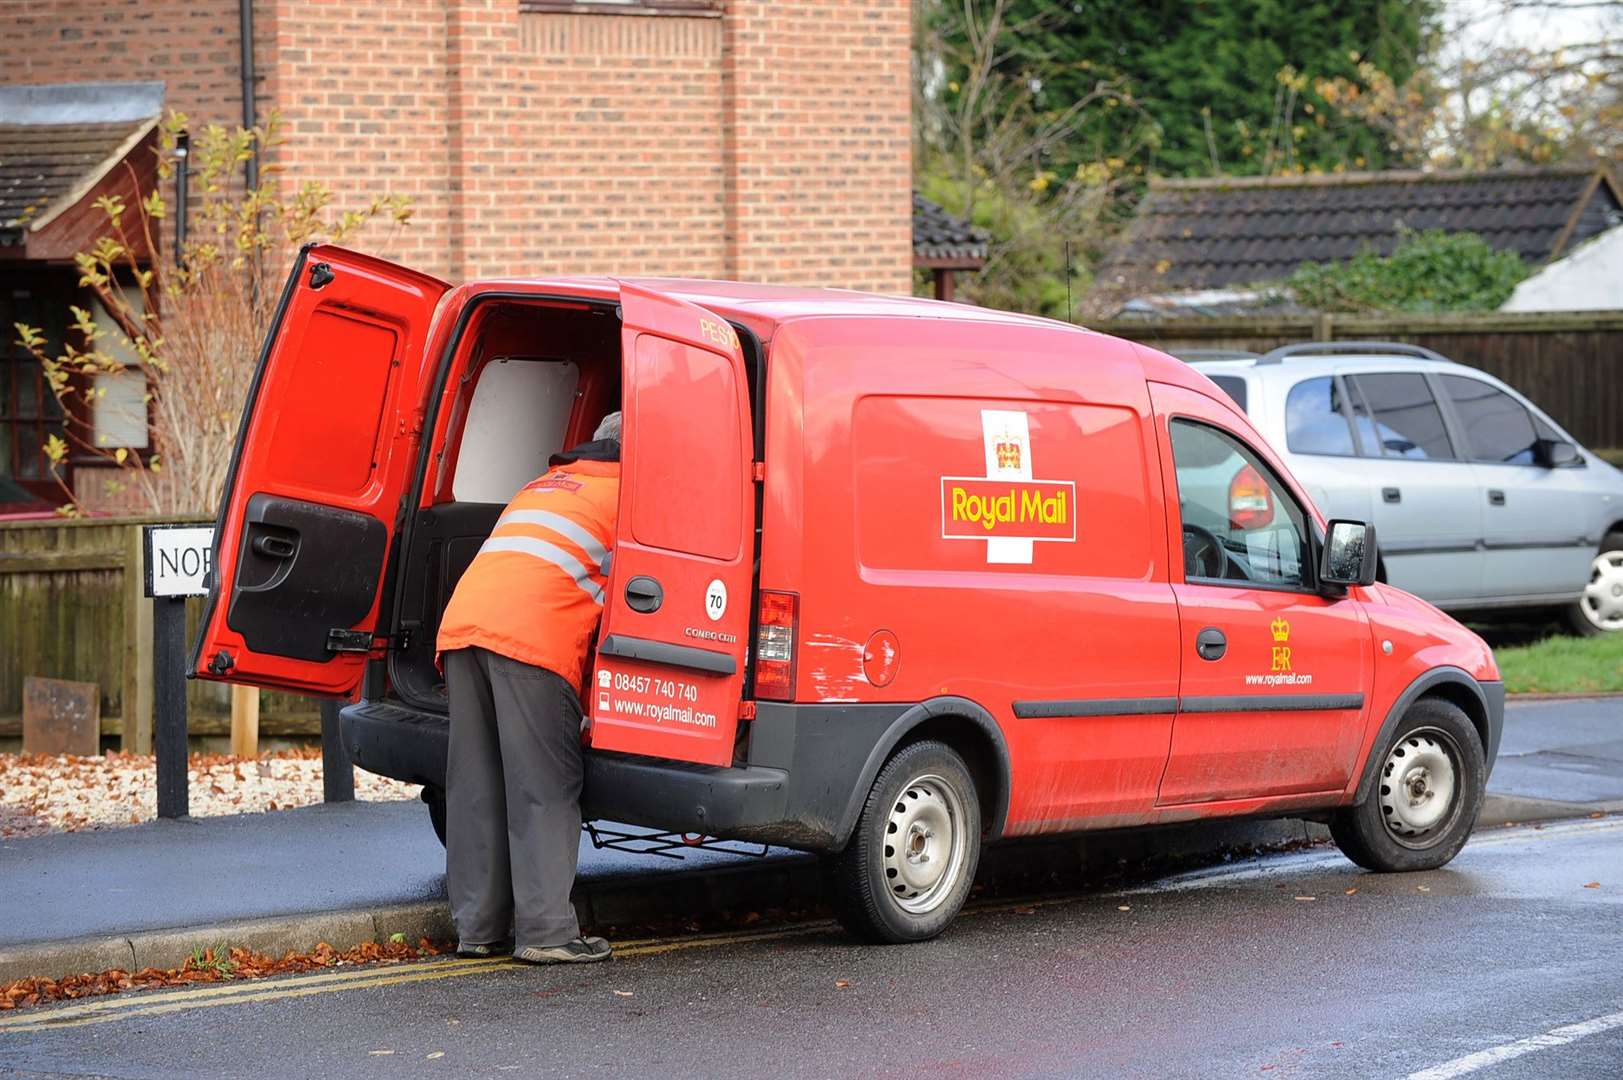 Ofcom has released options for overhauling the postal service. Image: Stock photo.